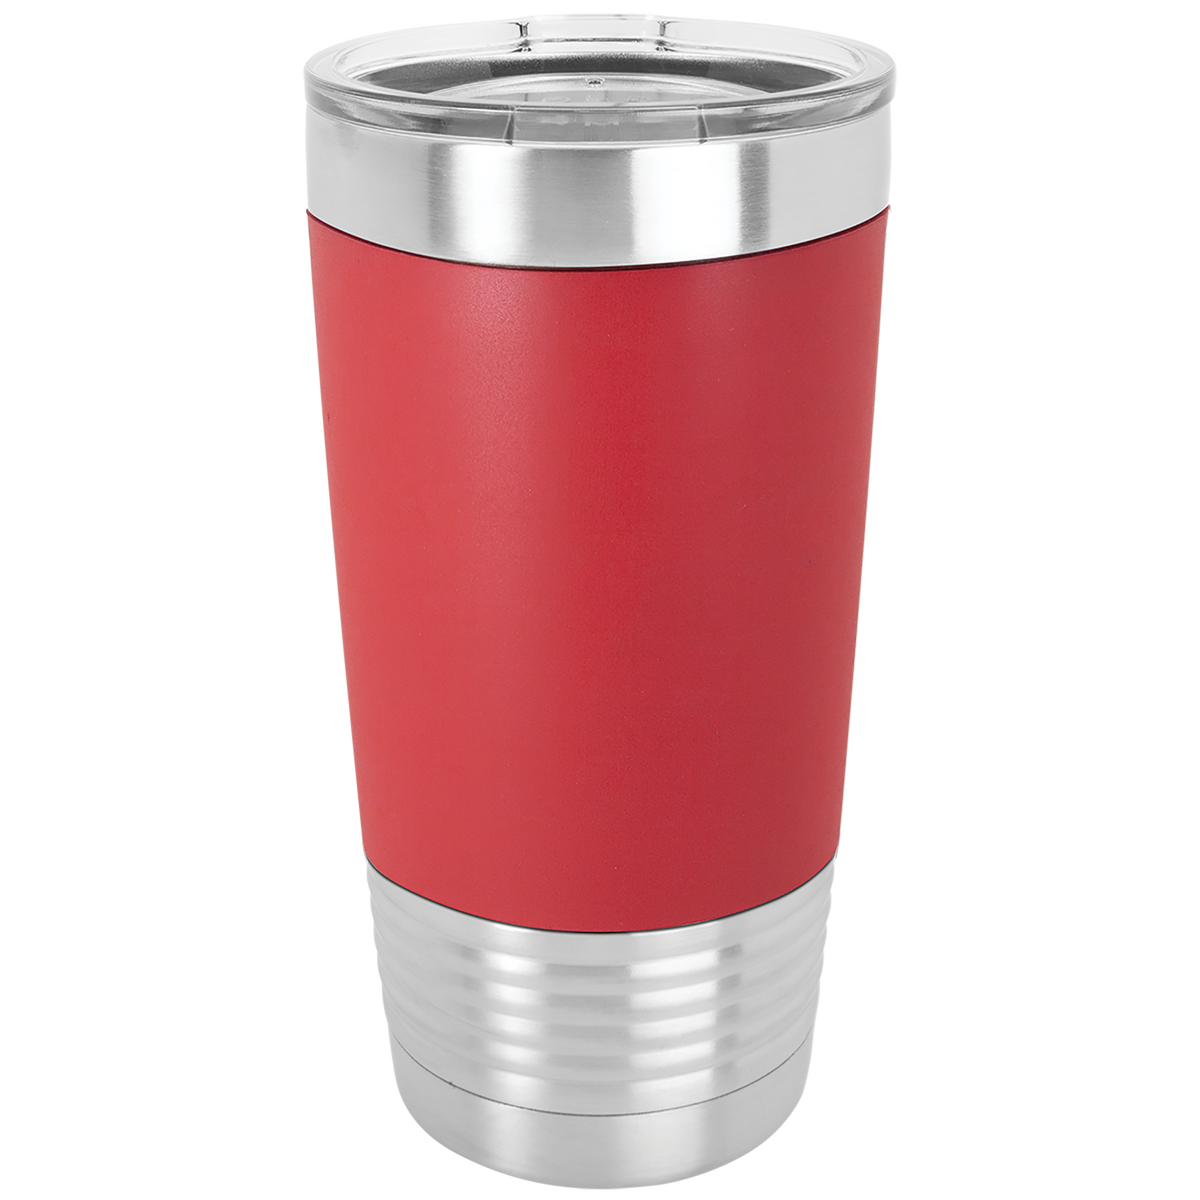  Rico Industries NCAA Louisville Cardinals Personalized 16 oz  Ceramic Tumbler with Silicone Grip, Deep Laser Engraved, Black and Red  Colored Design with Slide Lid, Travel Coffee Mug, Matte Glaze : Sports